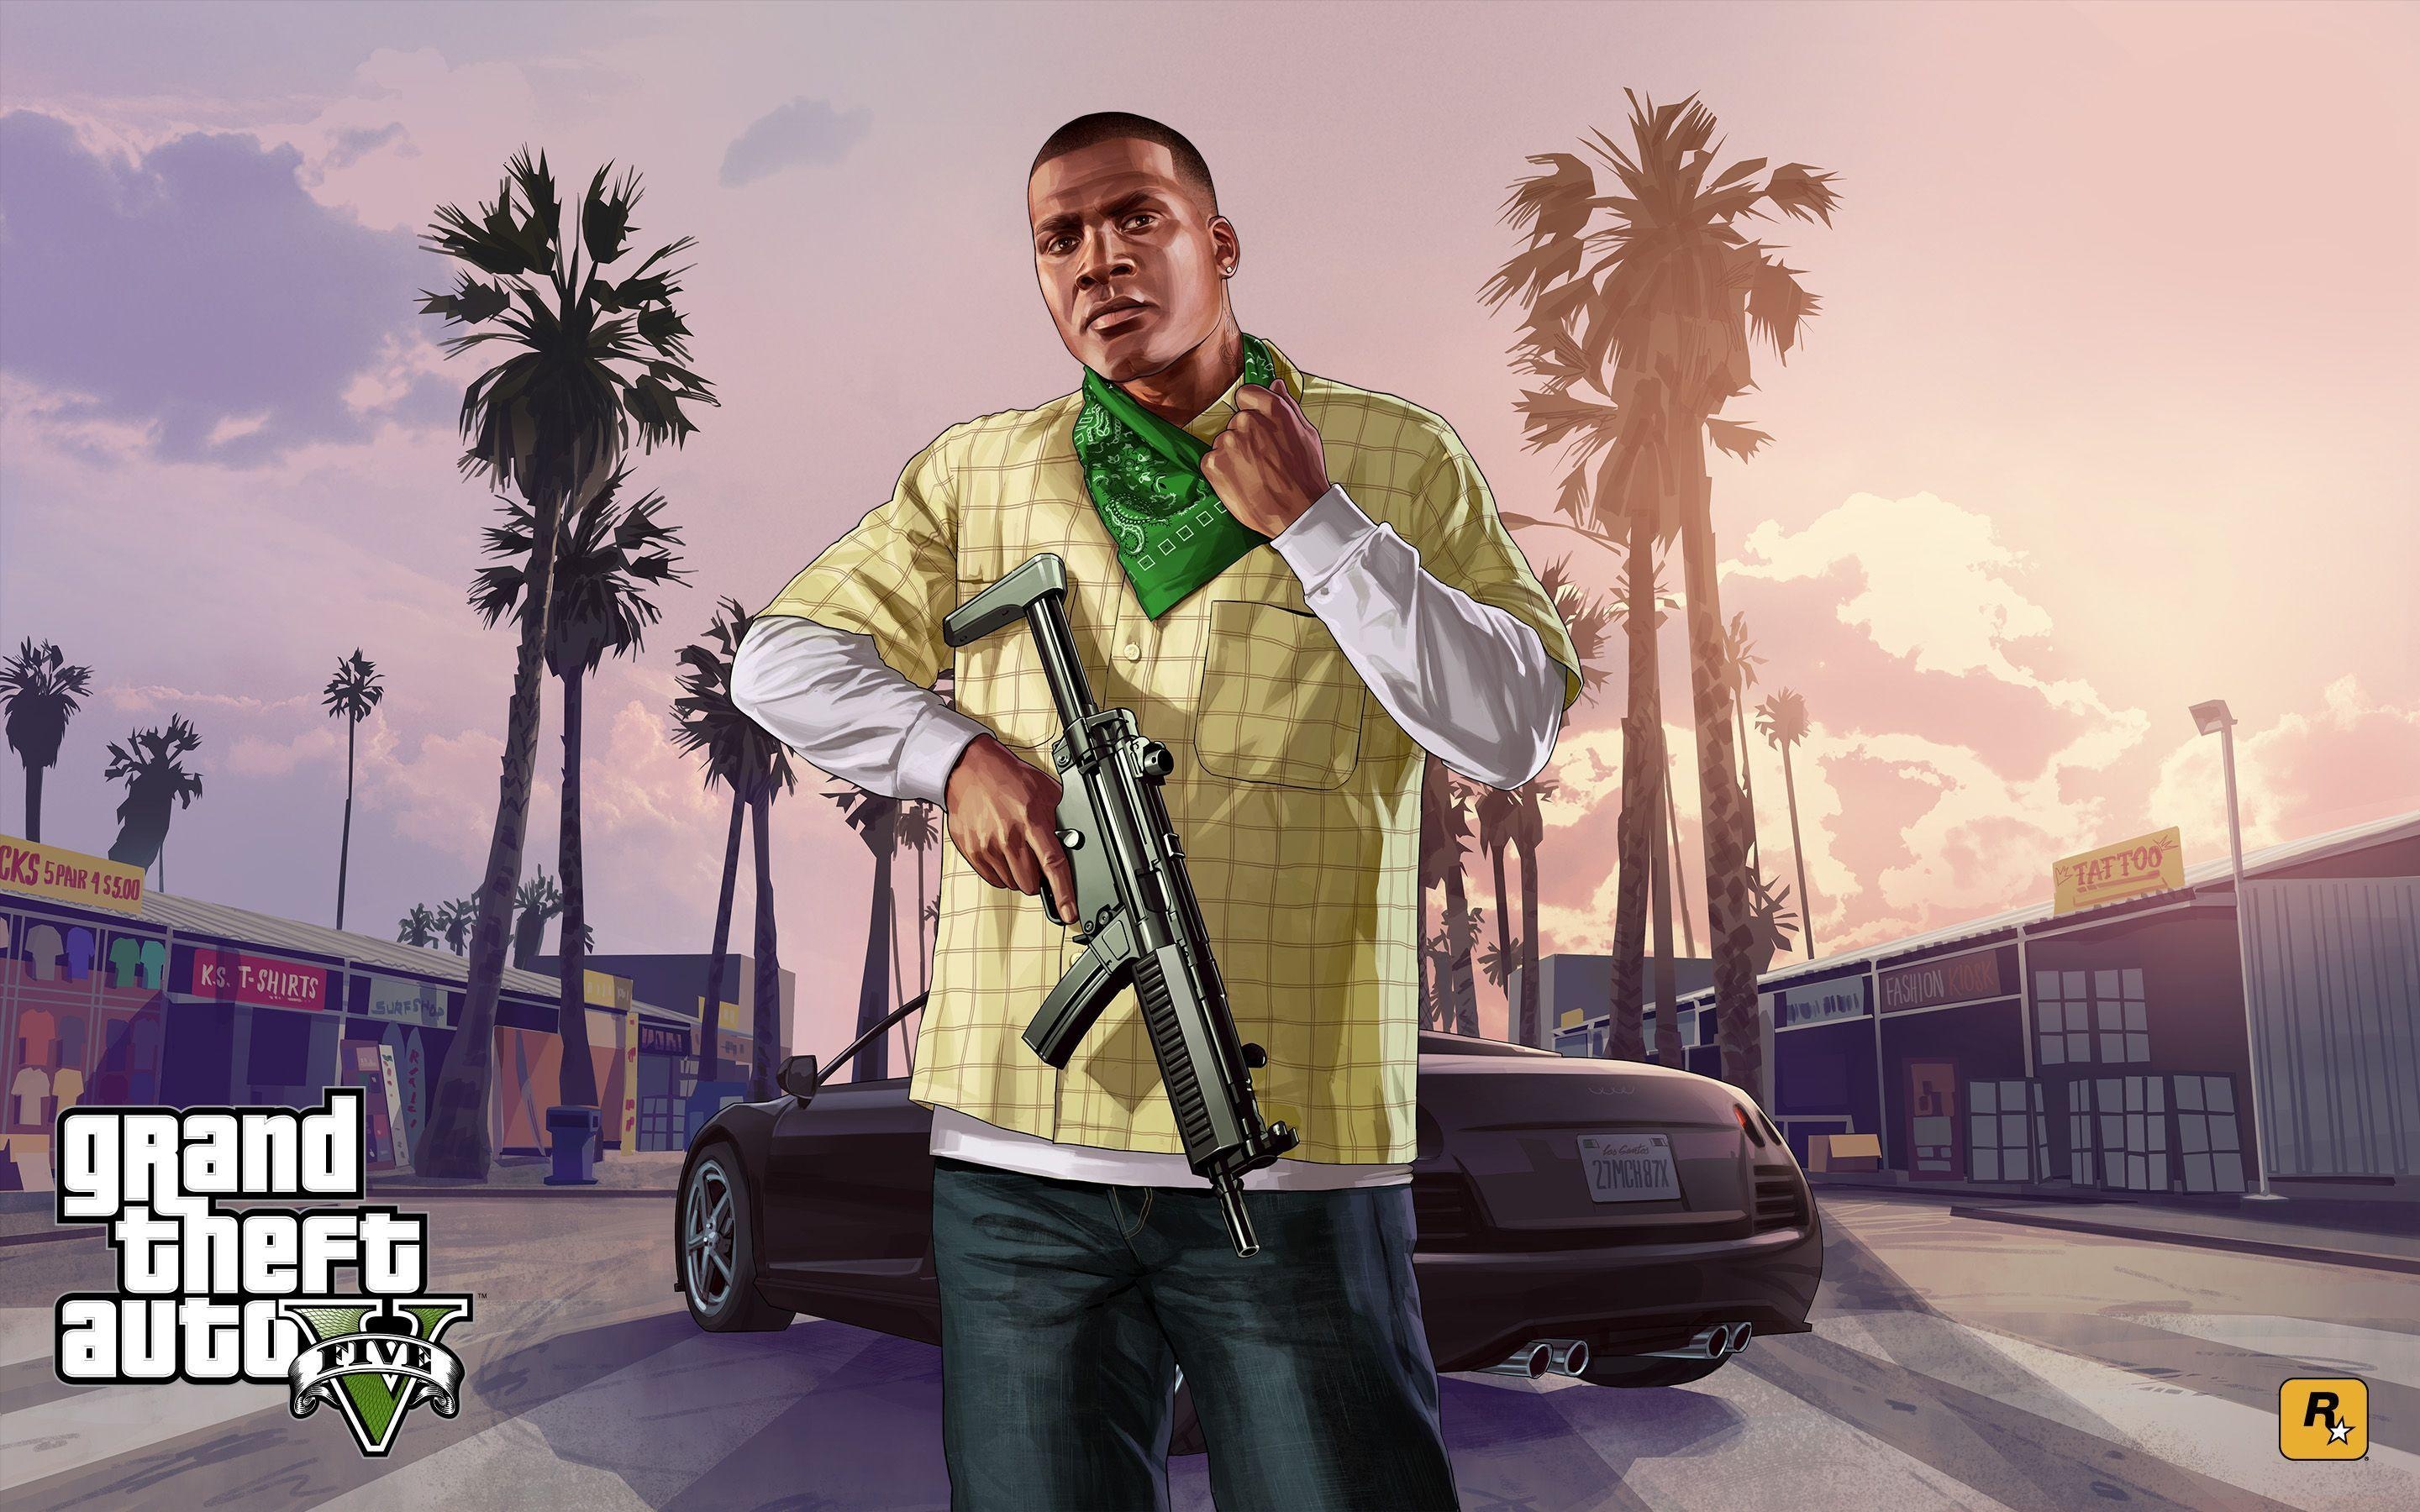 GTA V, Iconic character, Vibrant cityscape, High-speed pursuits, 2880x1800 HD Desktop